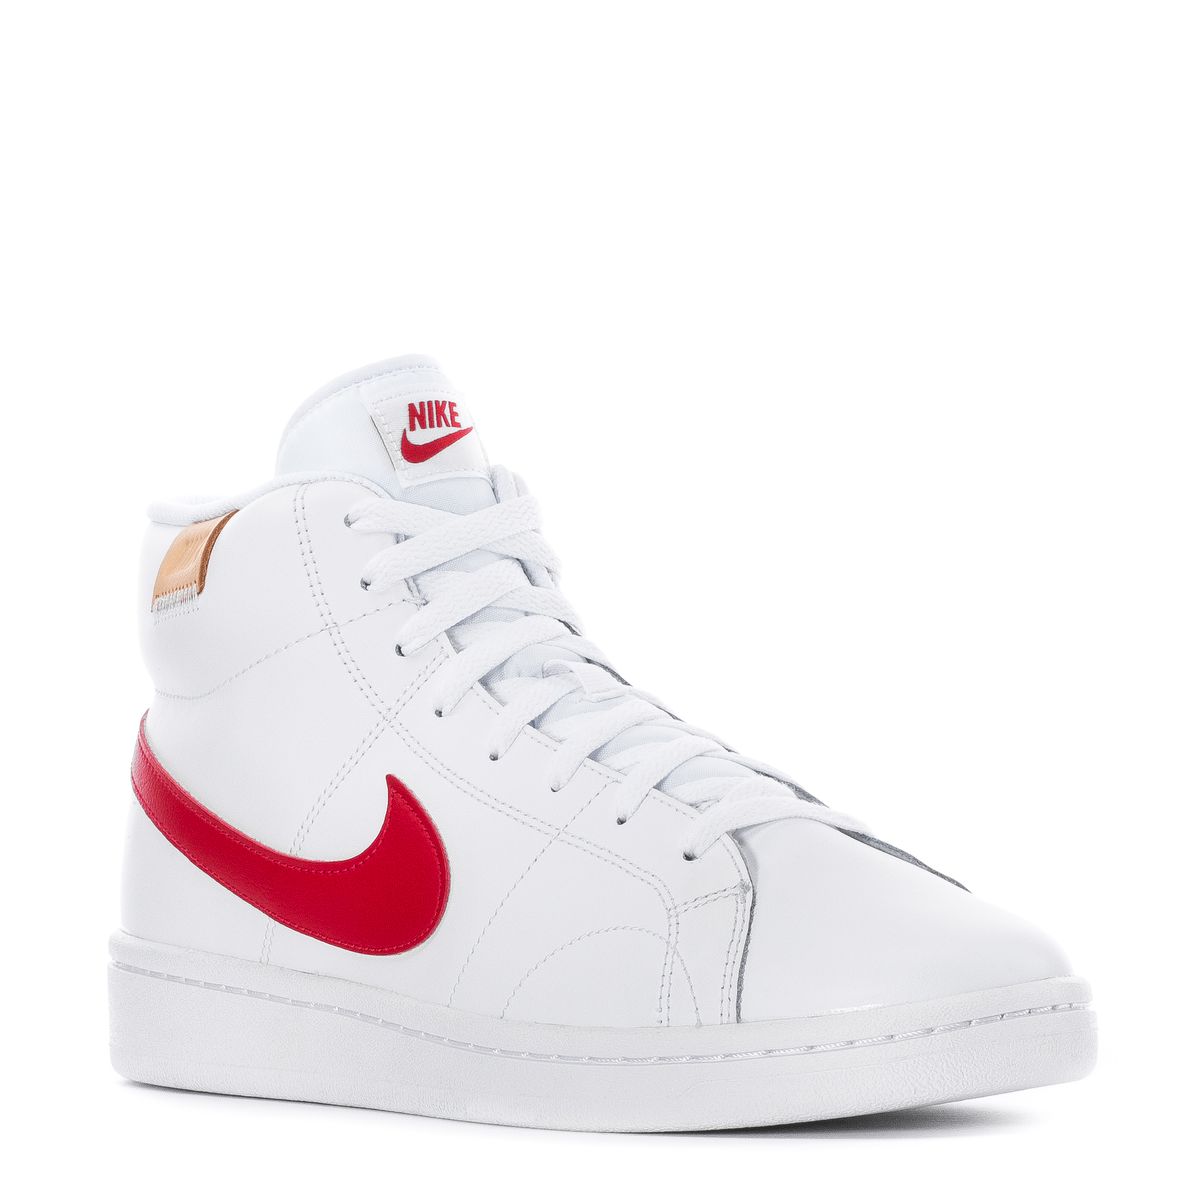 Court Royale 2 Mid White University Red - FF Stores